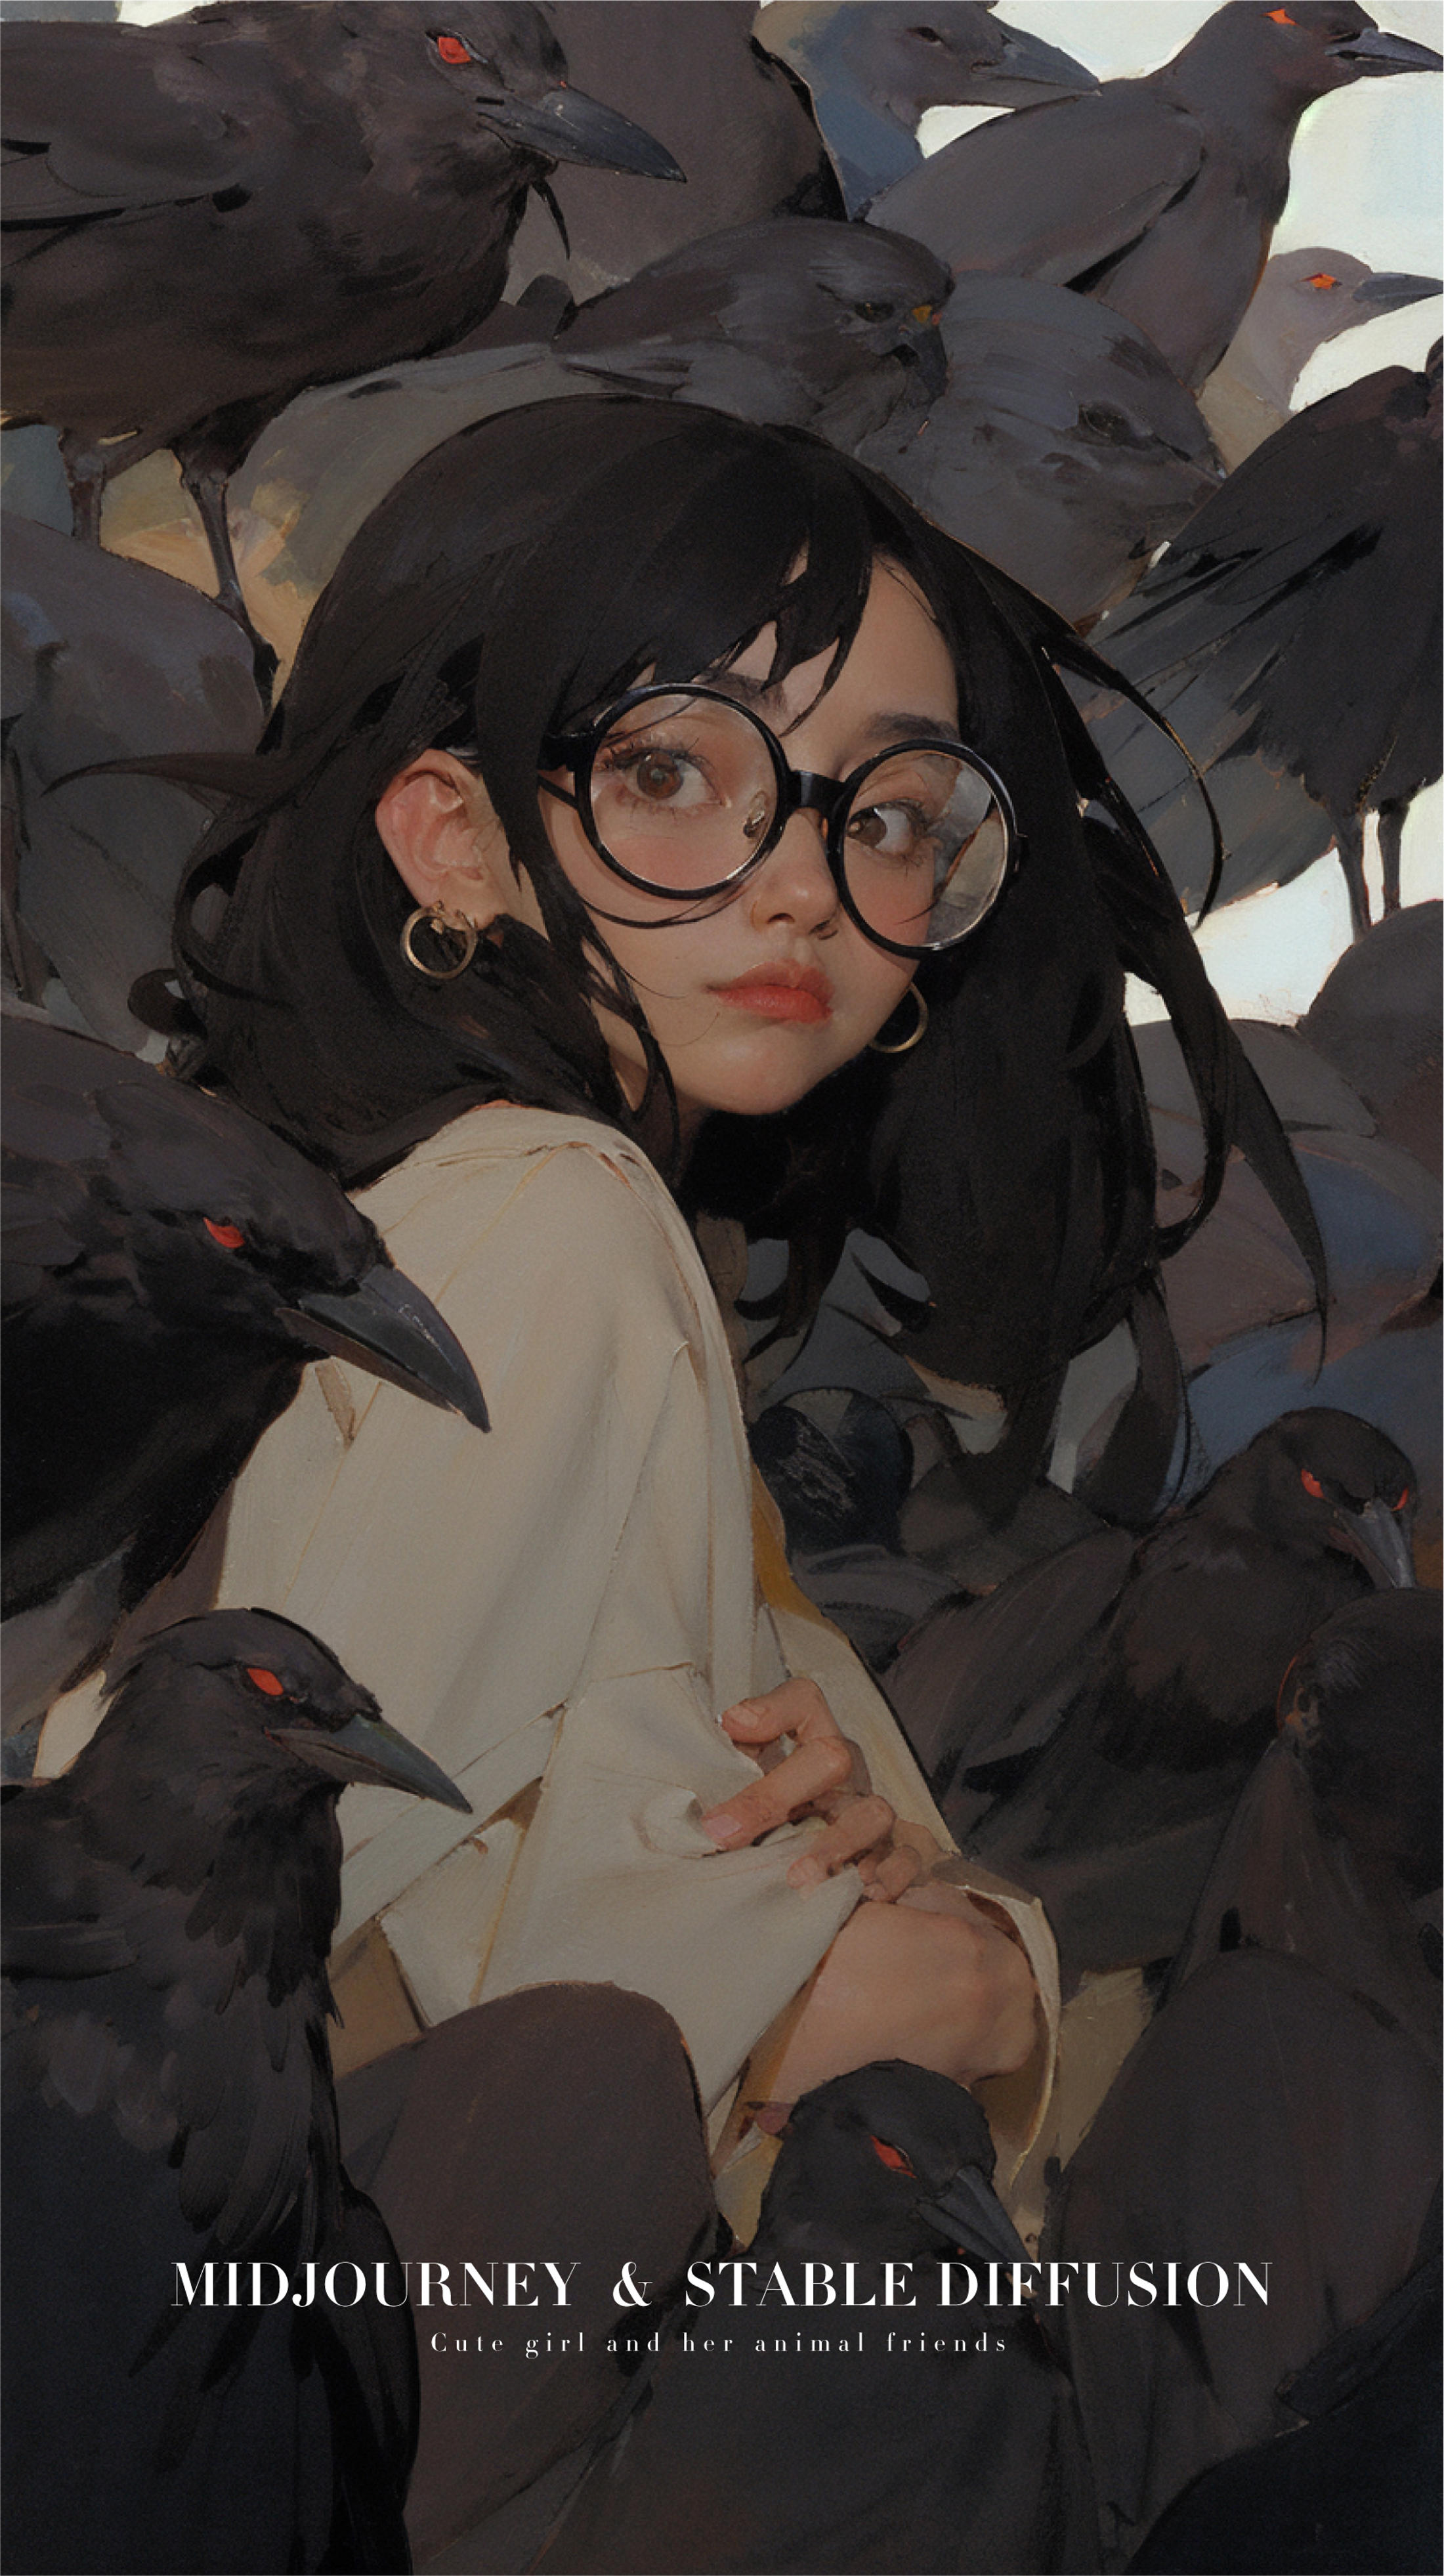 A young girl with glasses, surrounded by a flock of birds.